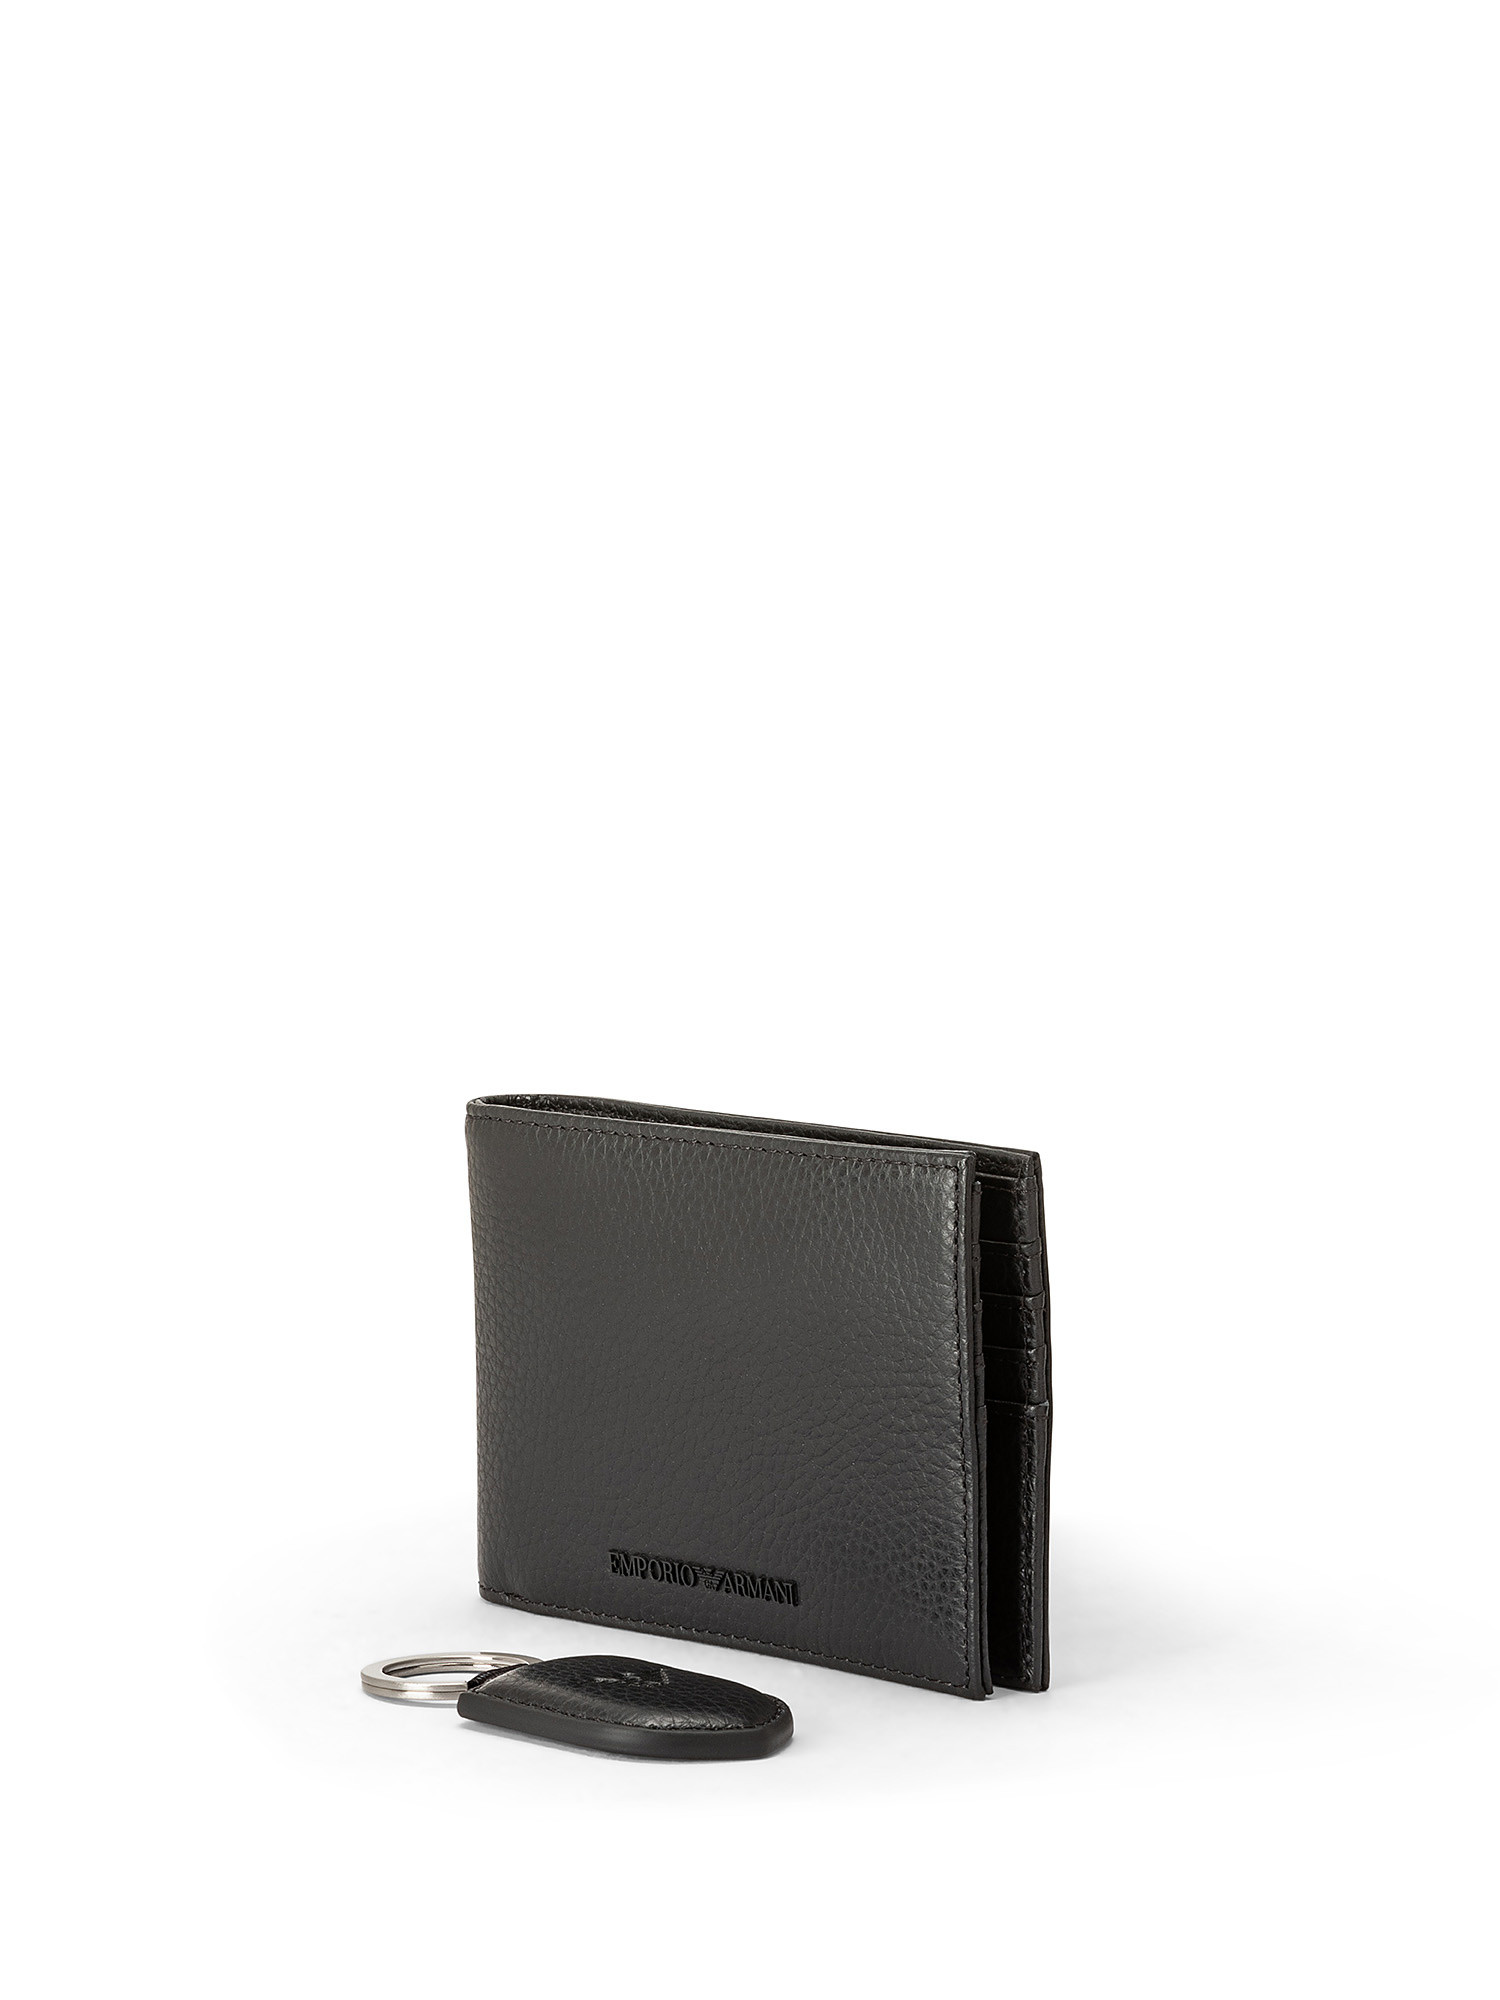 Emporio Armani - Gift box with tumbled leather wallet and key ring, Black, large image number 1